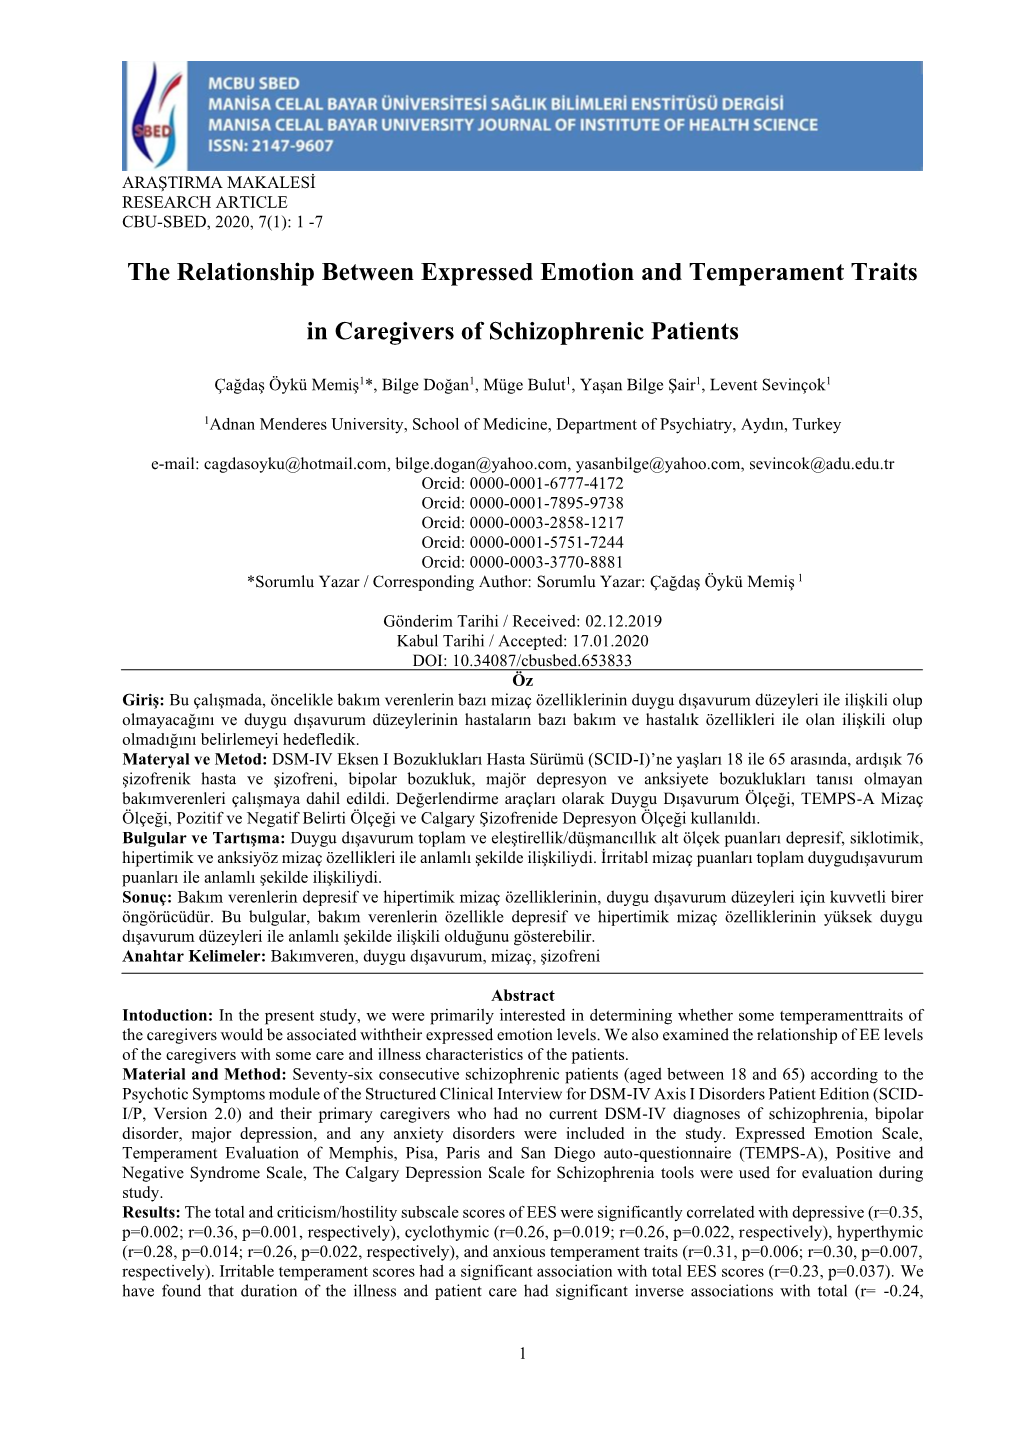 The Relationship Between Expressed Emotion and Temperament Traits In